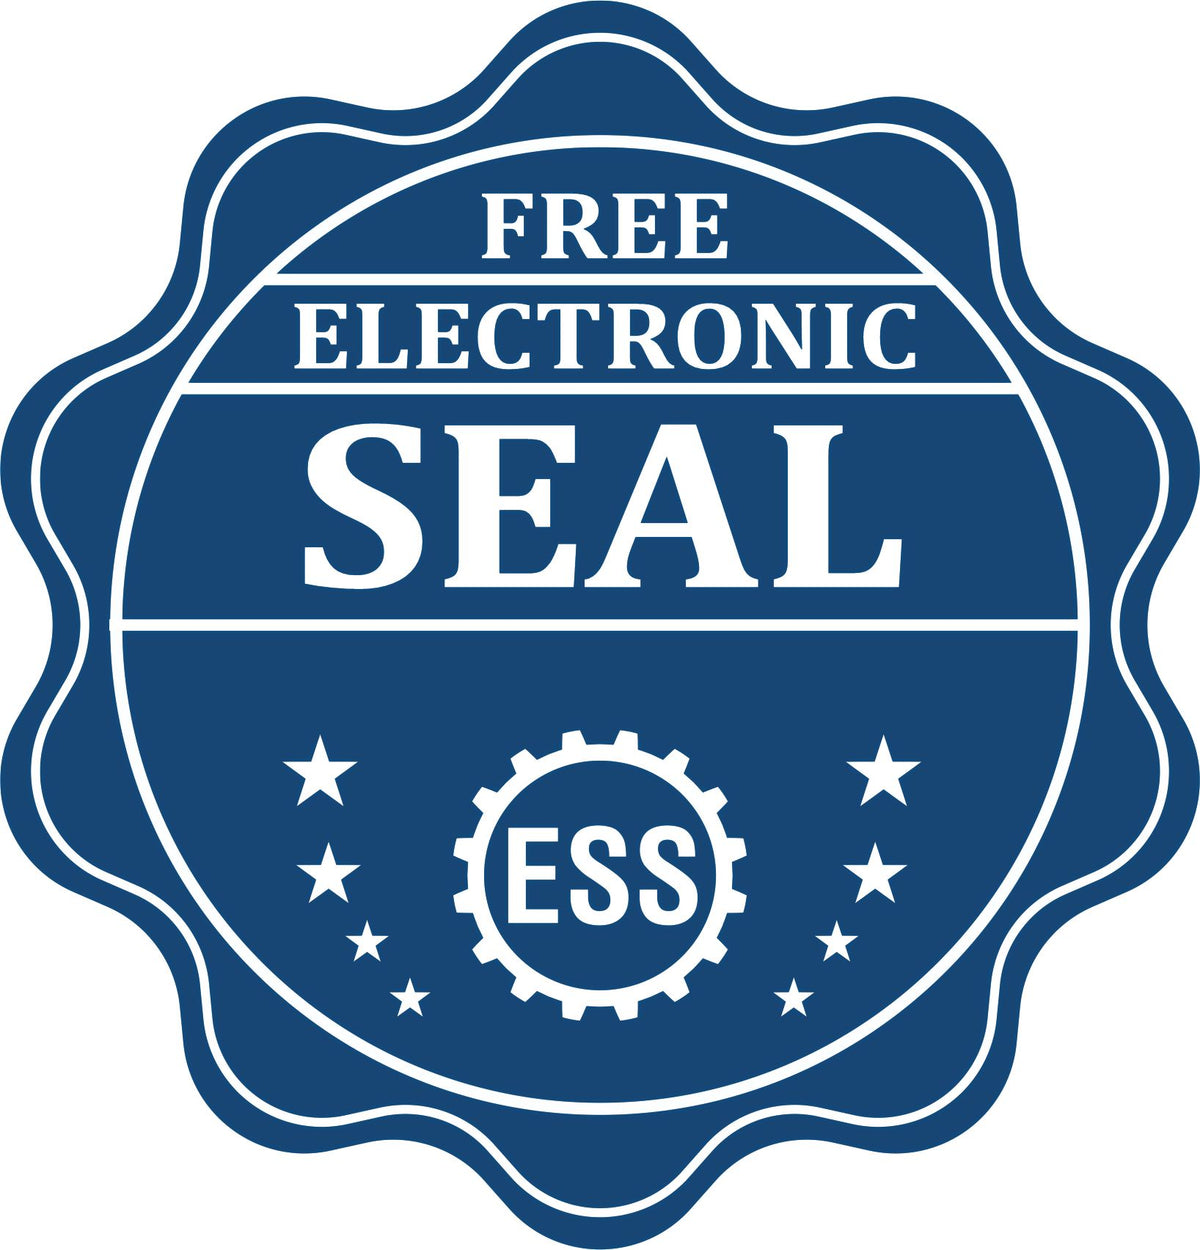 A badge showing a free electronic seal for the Slim Pre-Inked West Virginia Architect Seal Stamp with stars and the ESS gear on the emblem.